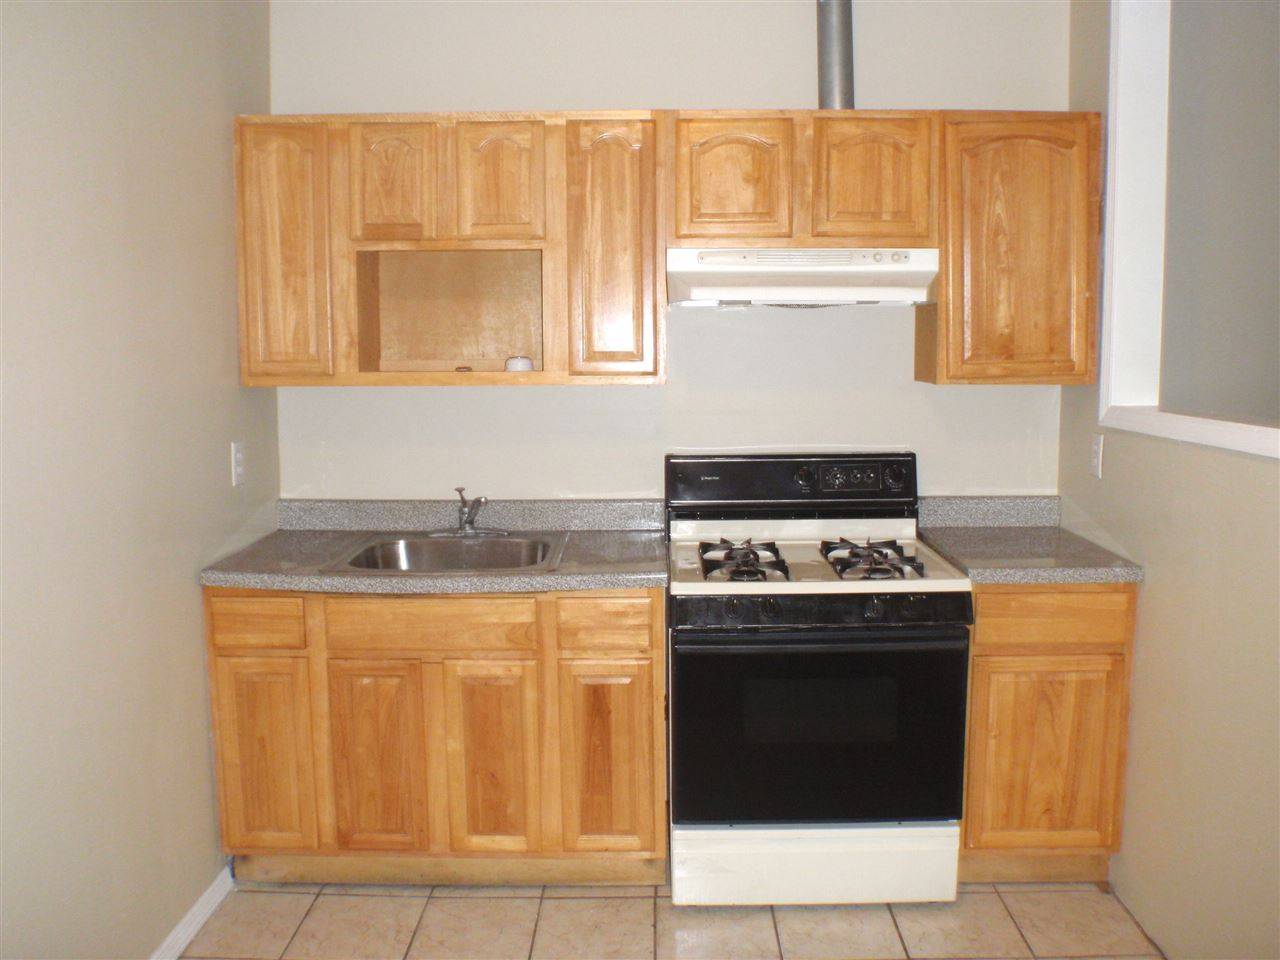 Move into this charming Jersey City Heights 1 bedroom rental